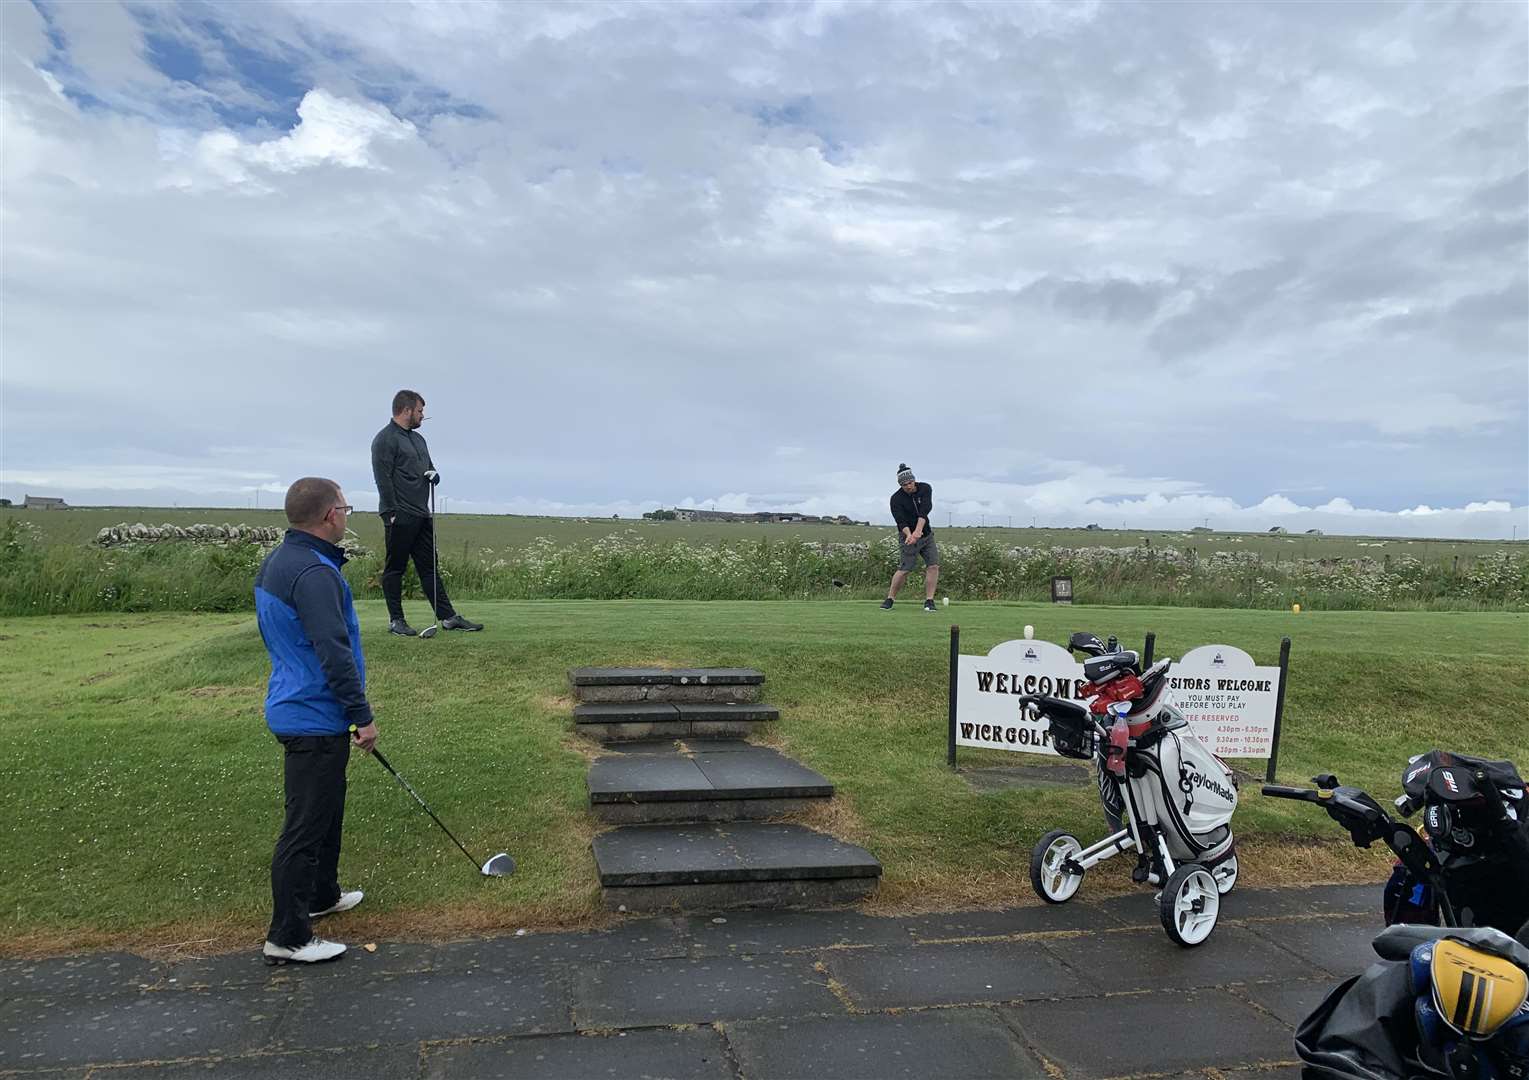 Wick Golf Club’s Stewart Ross on the tee with Graeme MacKay and Sanders Harper waiting their turn when golfers were allowed to play in threes last summer. Picture: Wick Golf Club